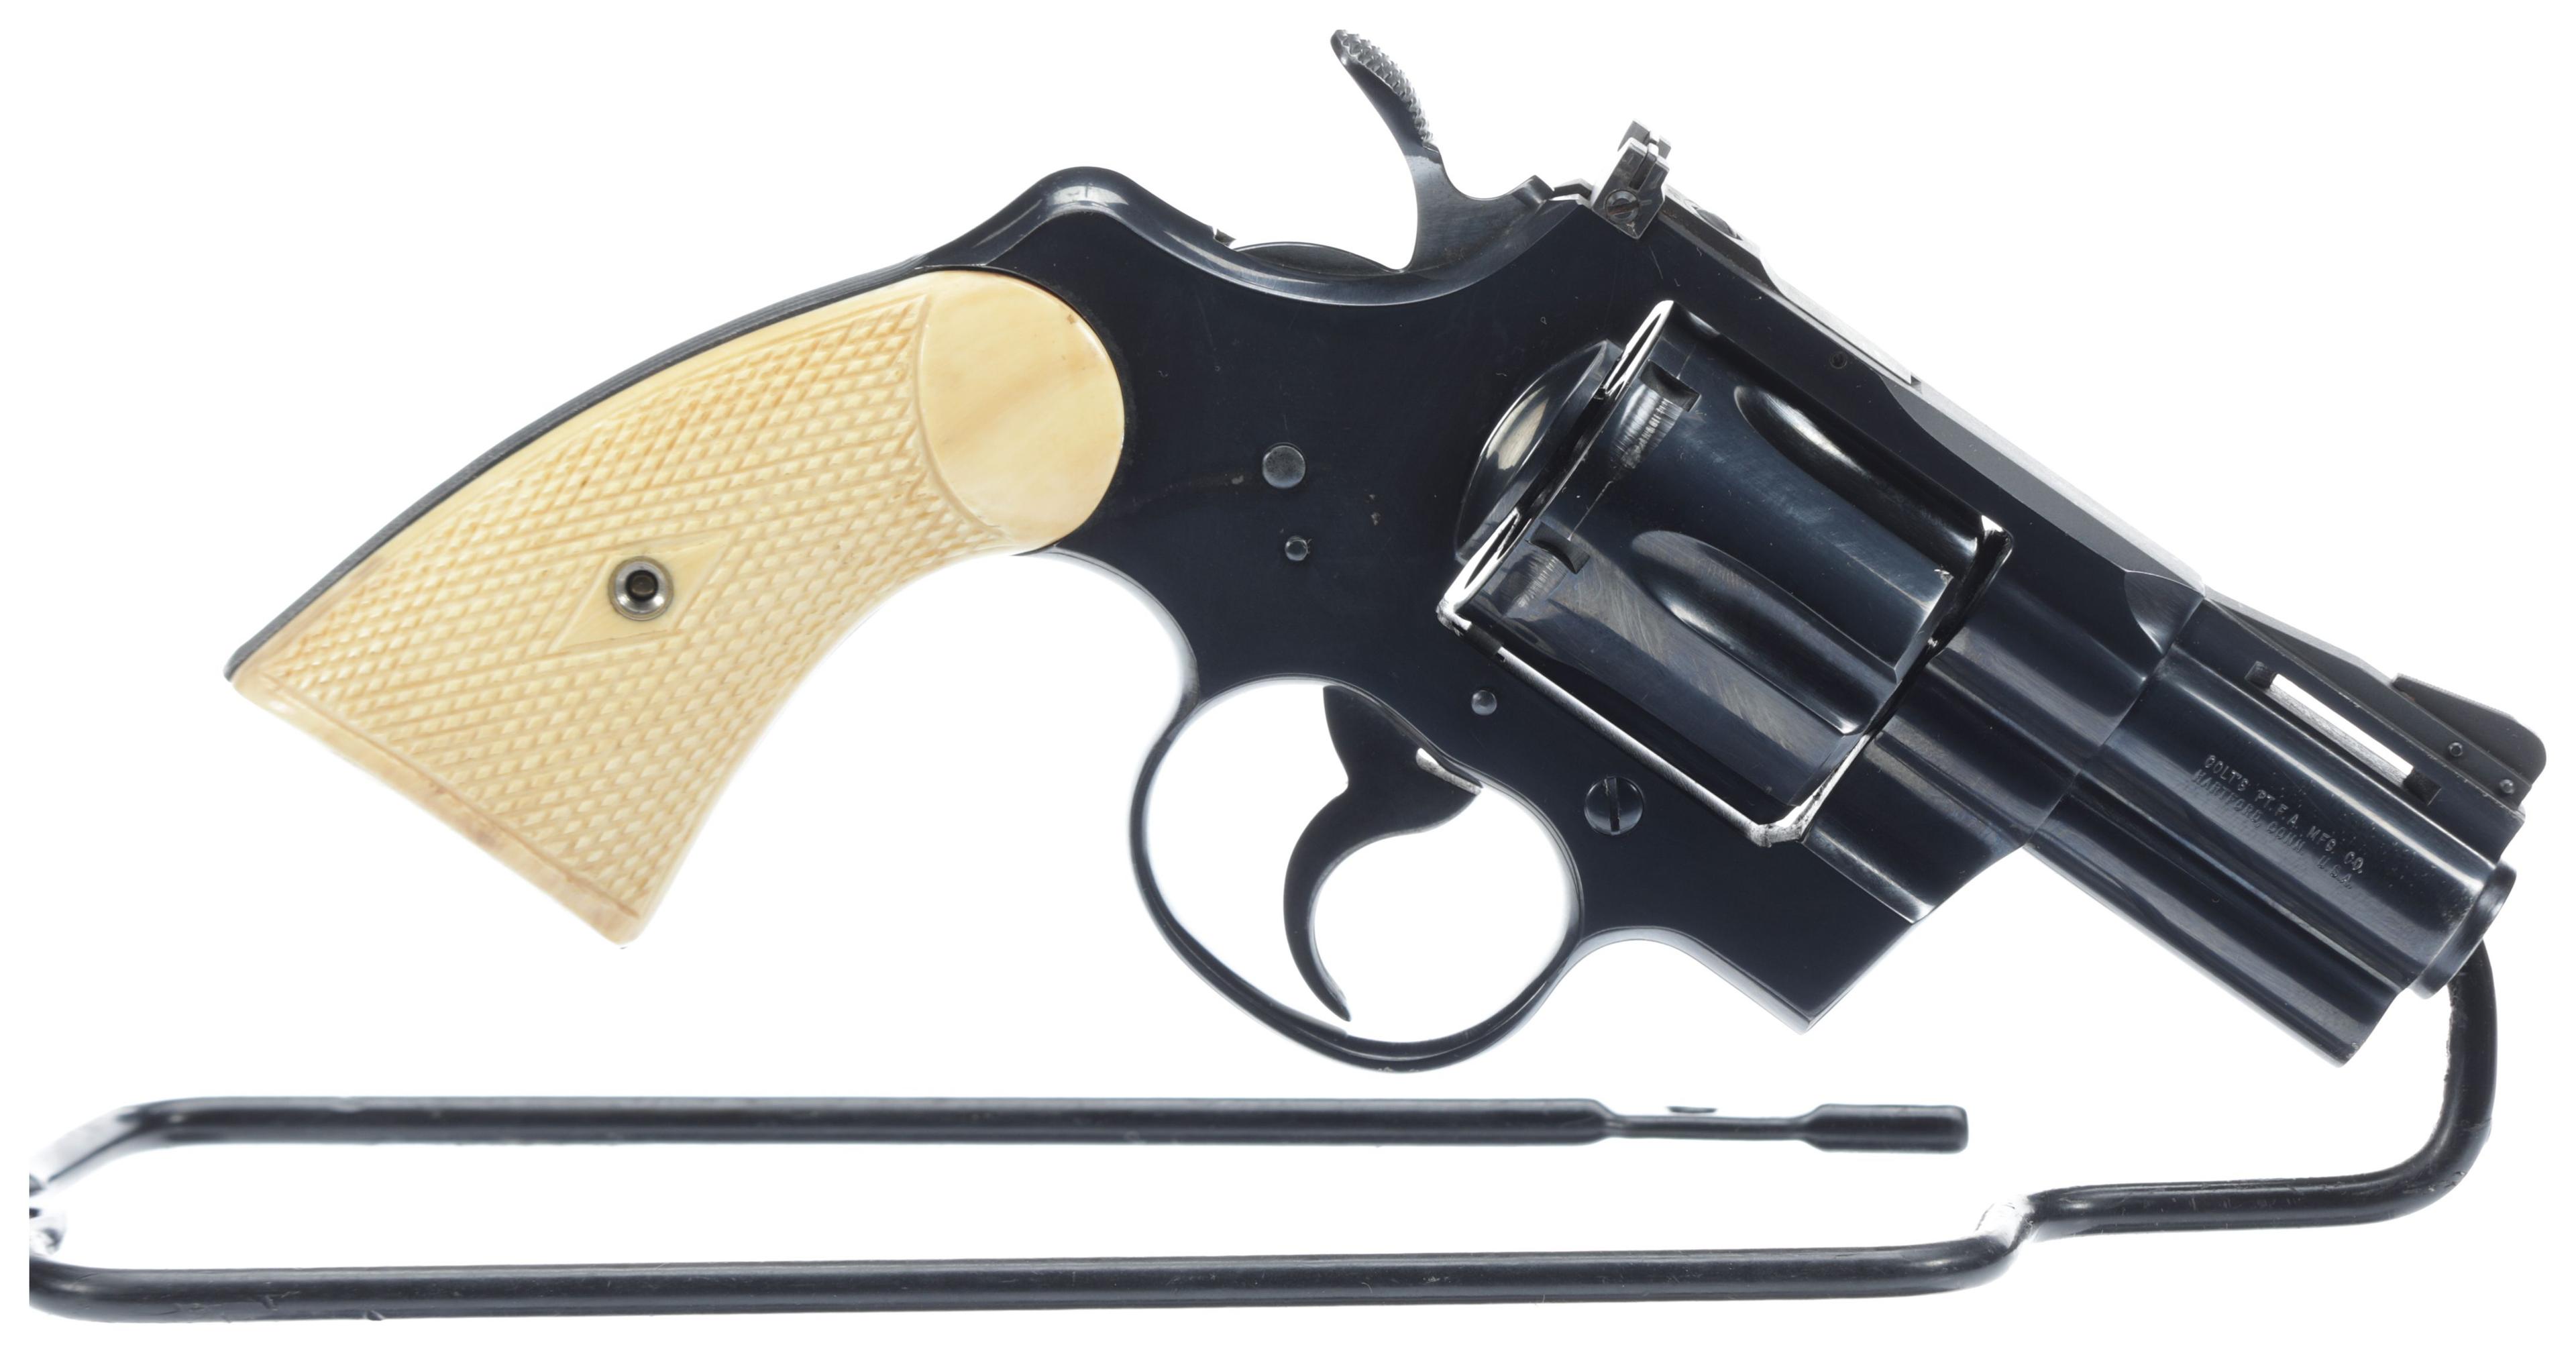 Colt Python Double Action Revolver with 2 1/2 Inch Barrel